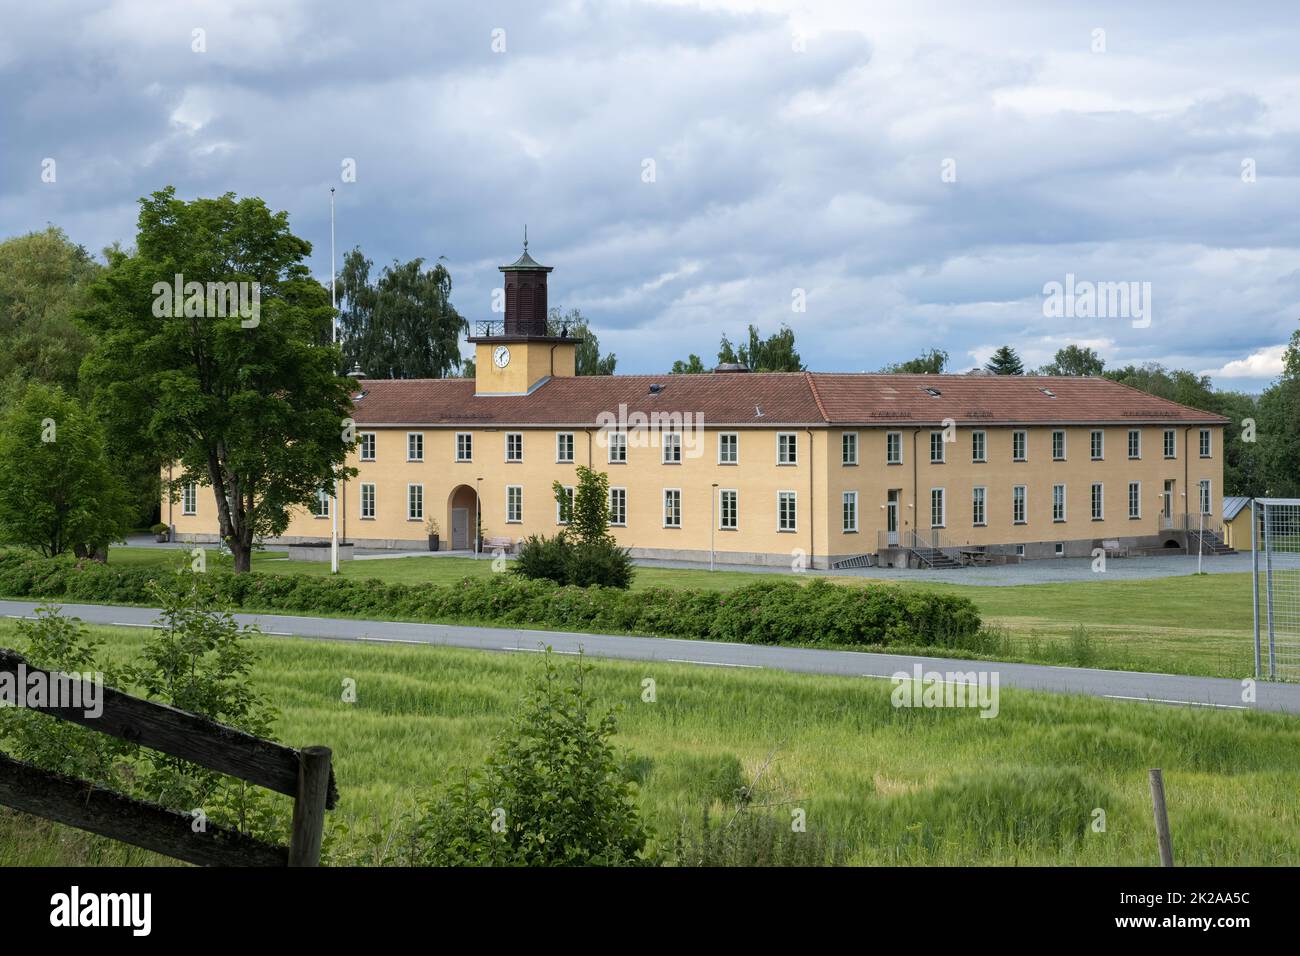 Ekne, Norway - July 05, 2022: Falstad was a German internment and transit camp during world war two. More than 200 prisoners were shot in the nearby f Stock Photo